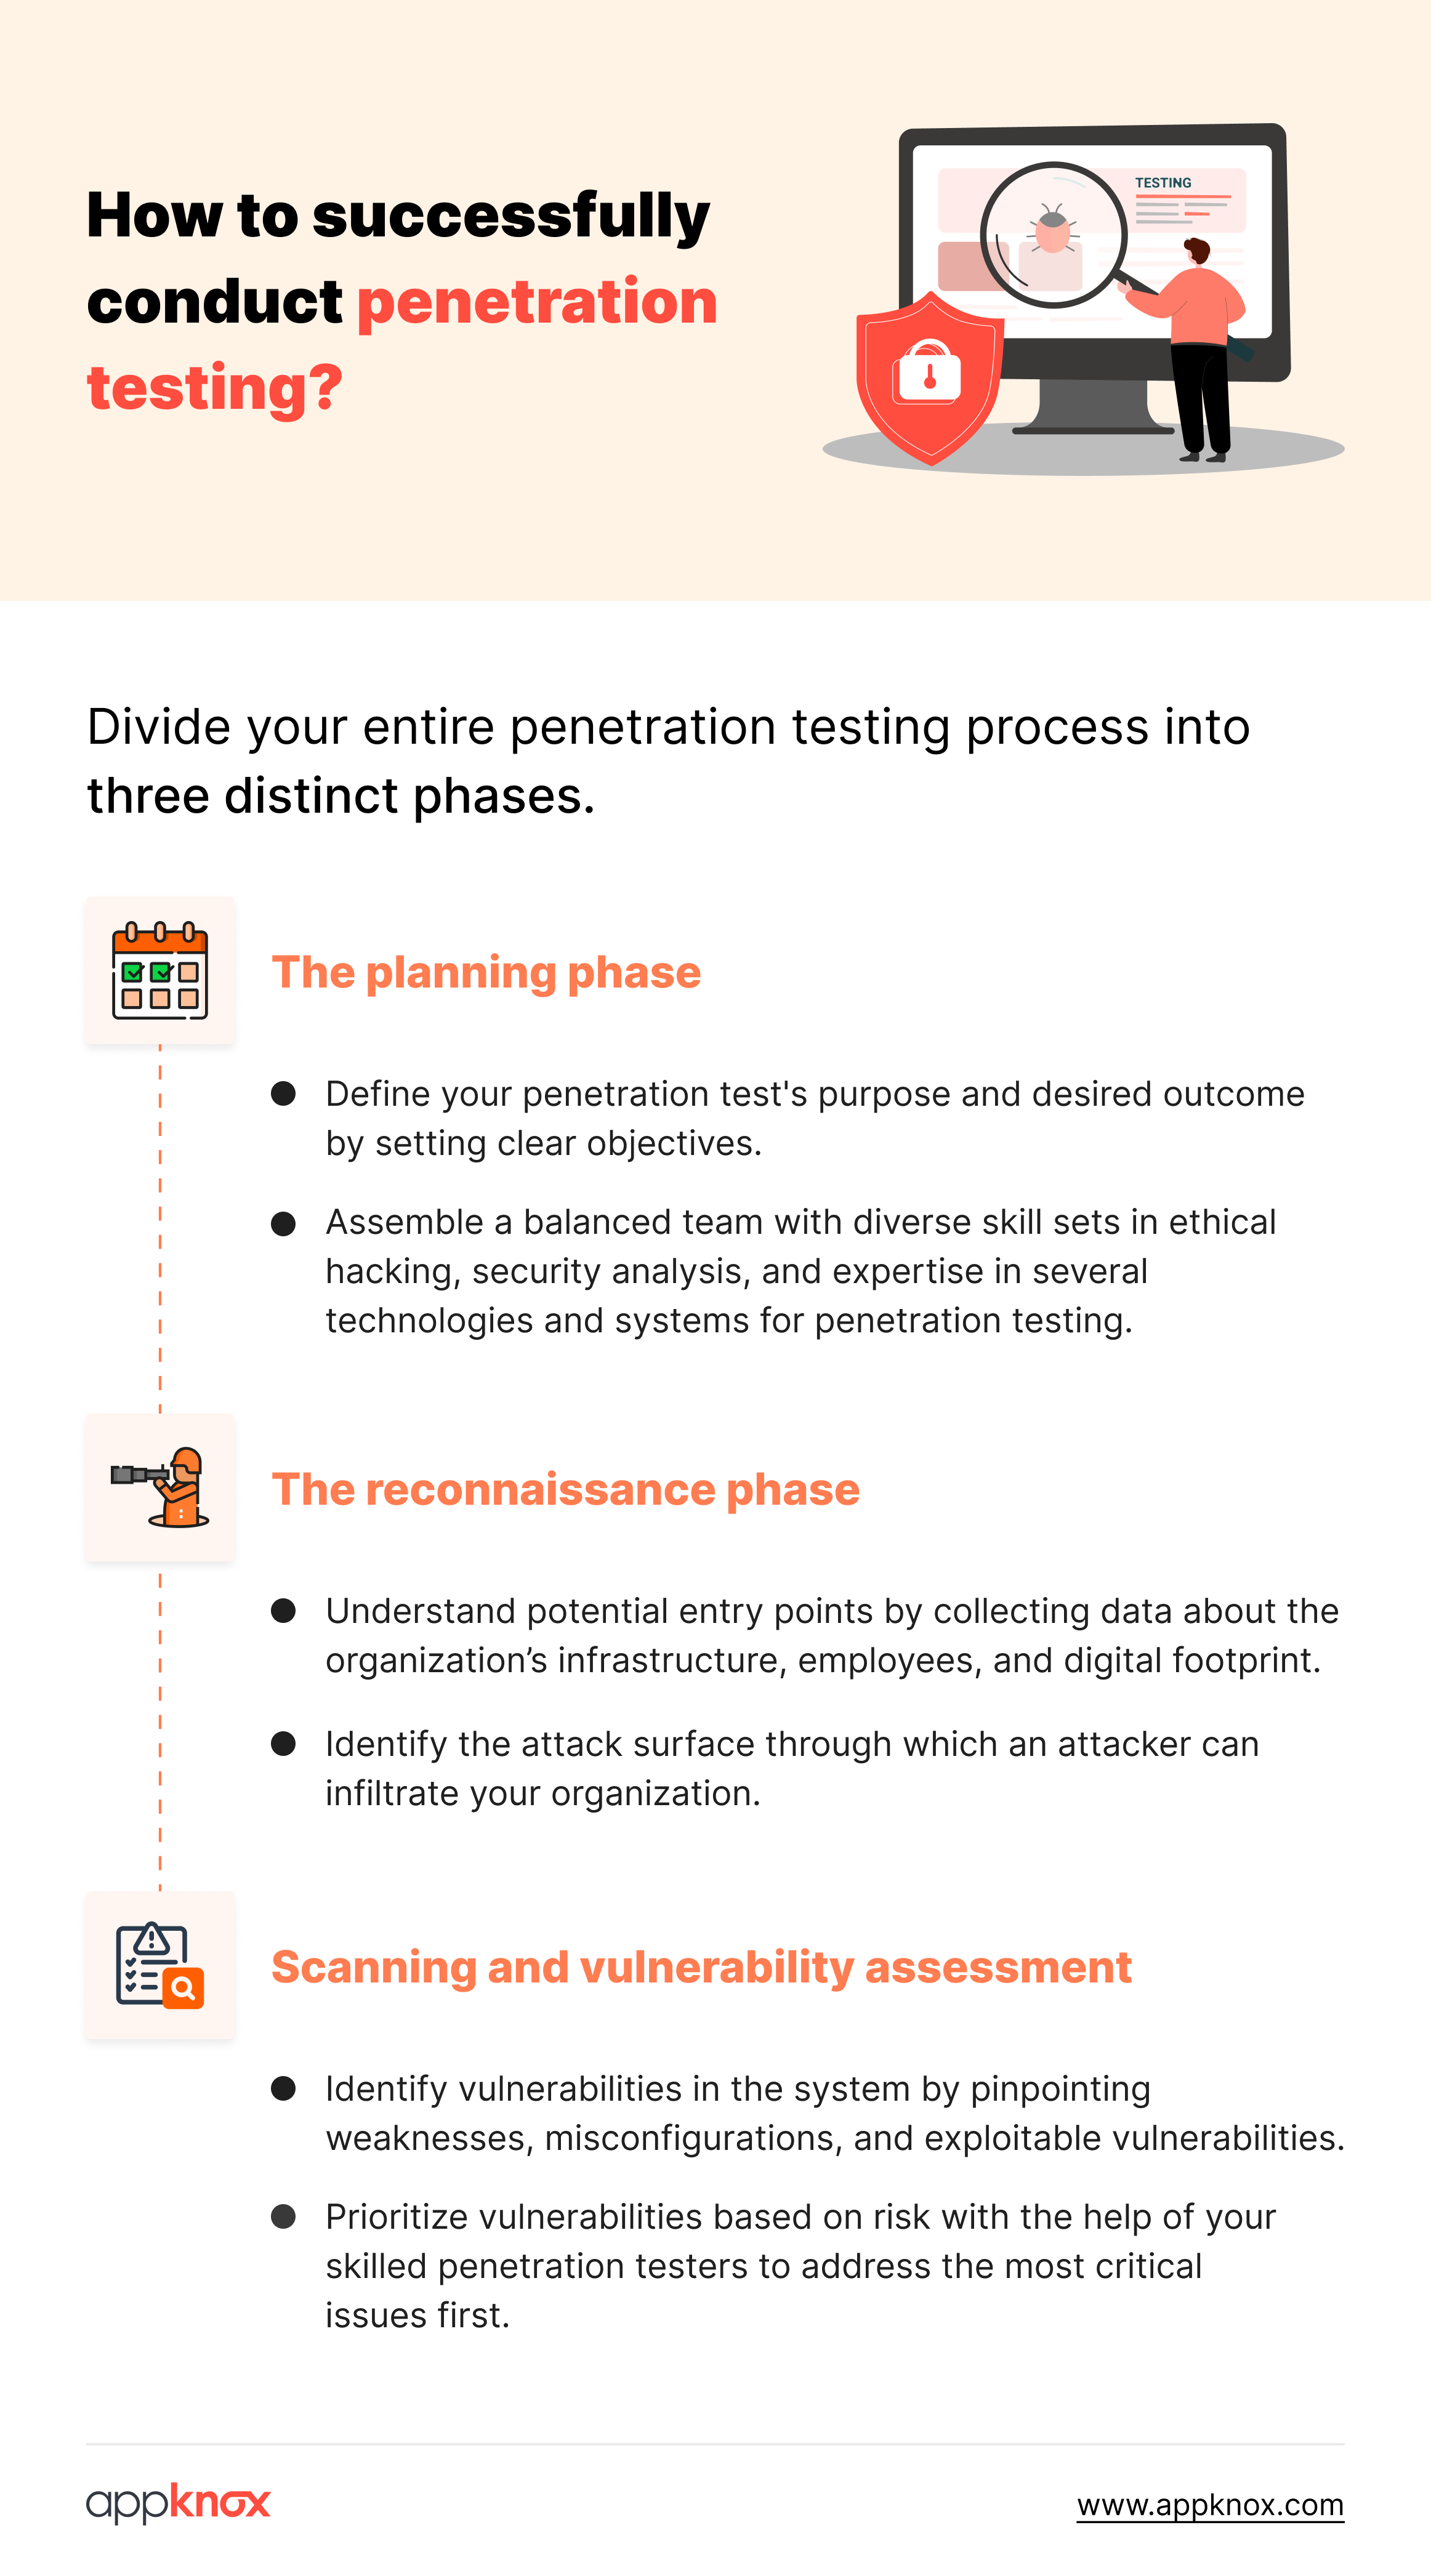 How to conduct penetration testing - Vulnerability assessment